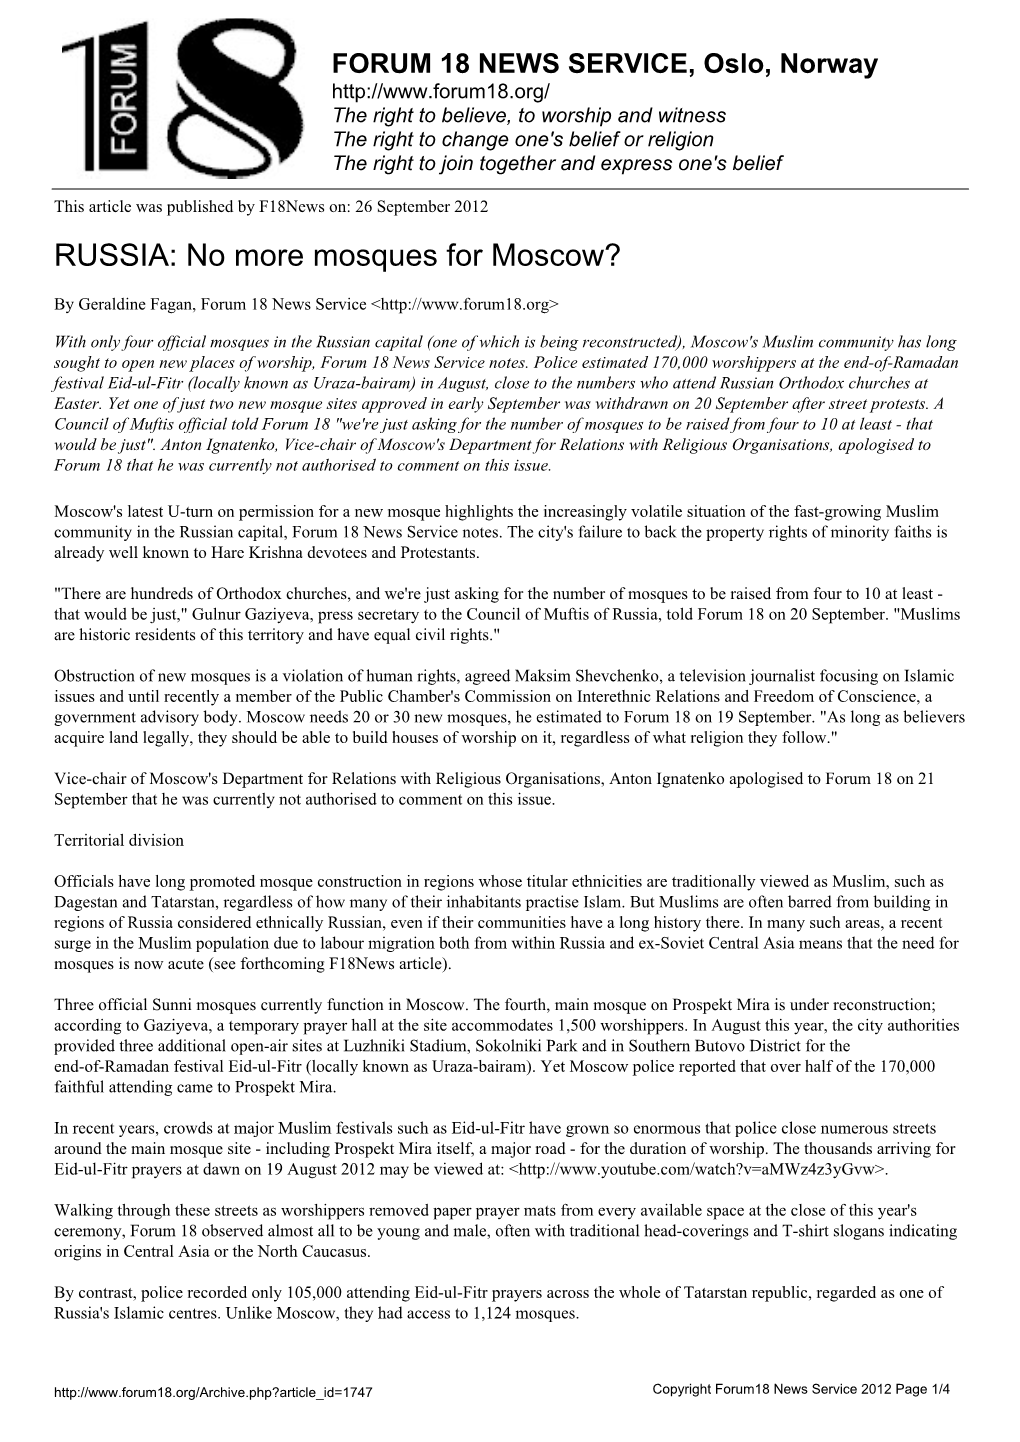 RUSSIA: No More Mosques for Moscow?